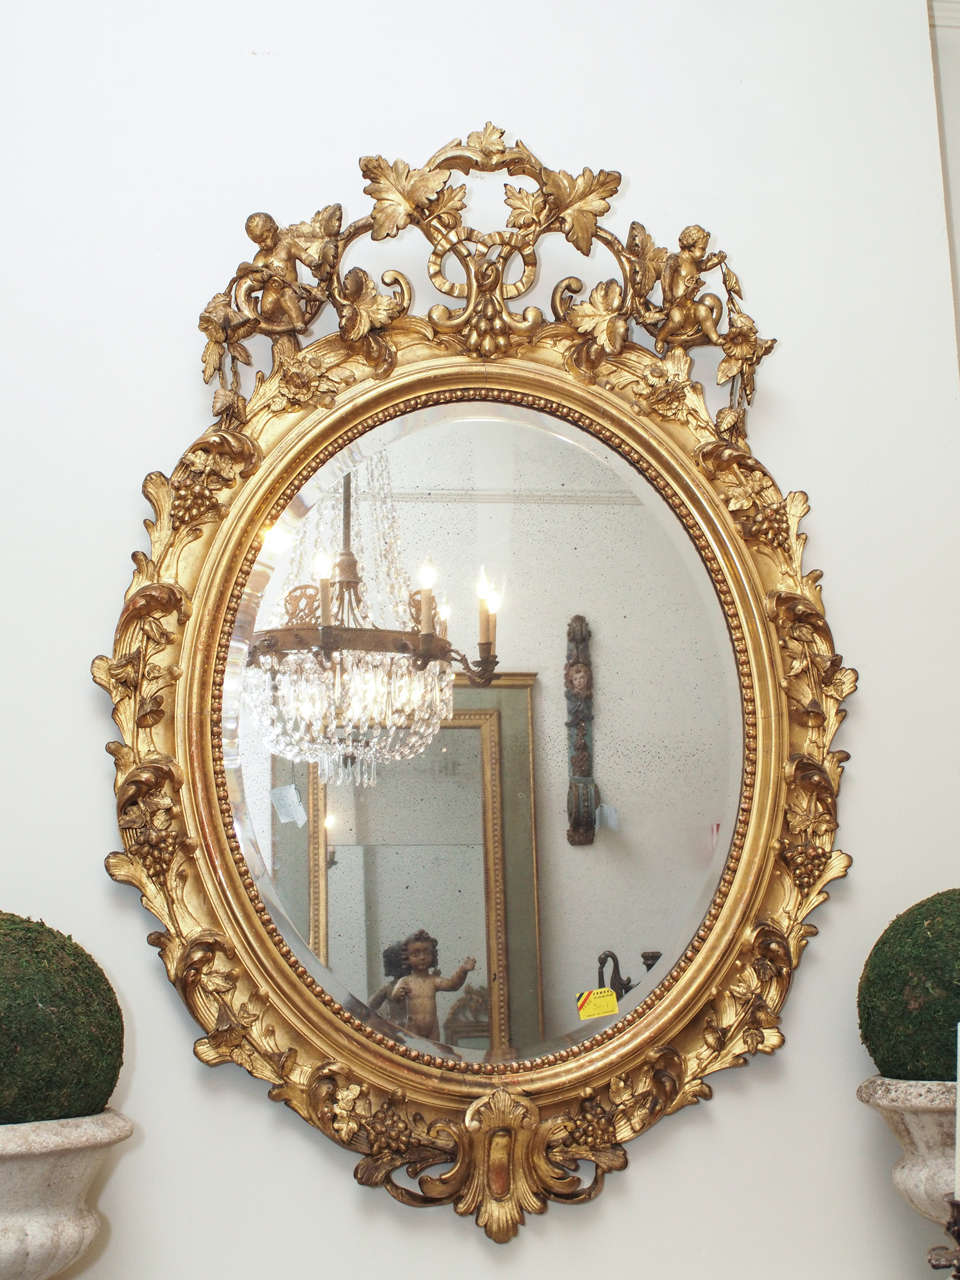 A beautiful oval carved giltwood mirror with trumpet flowers and grapes all around with two angels sitting on each side of the top of the mirror.